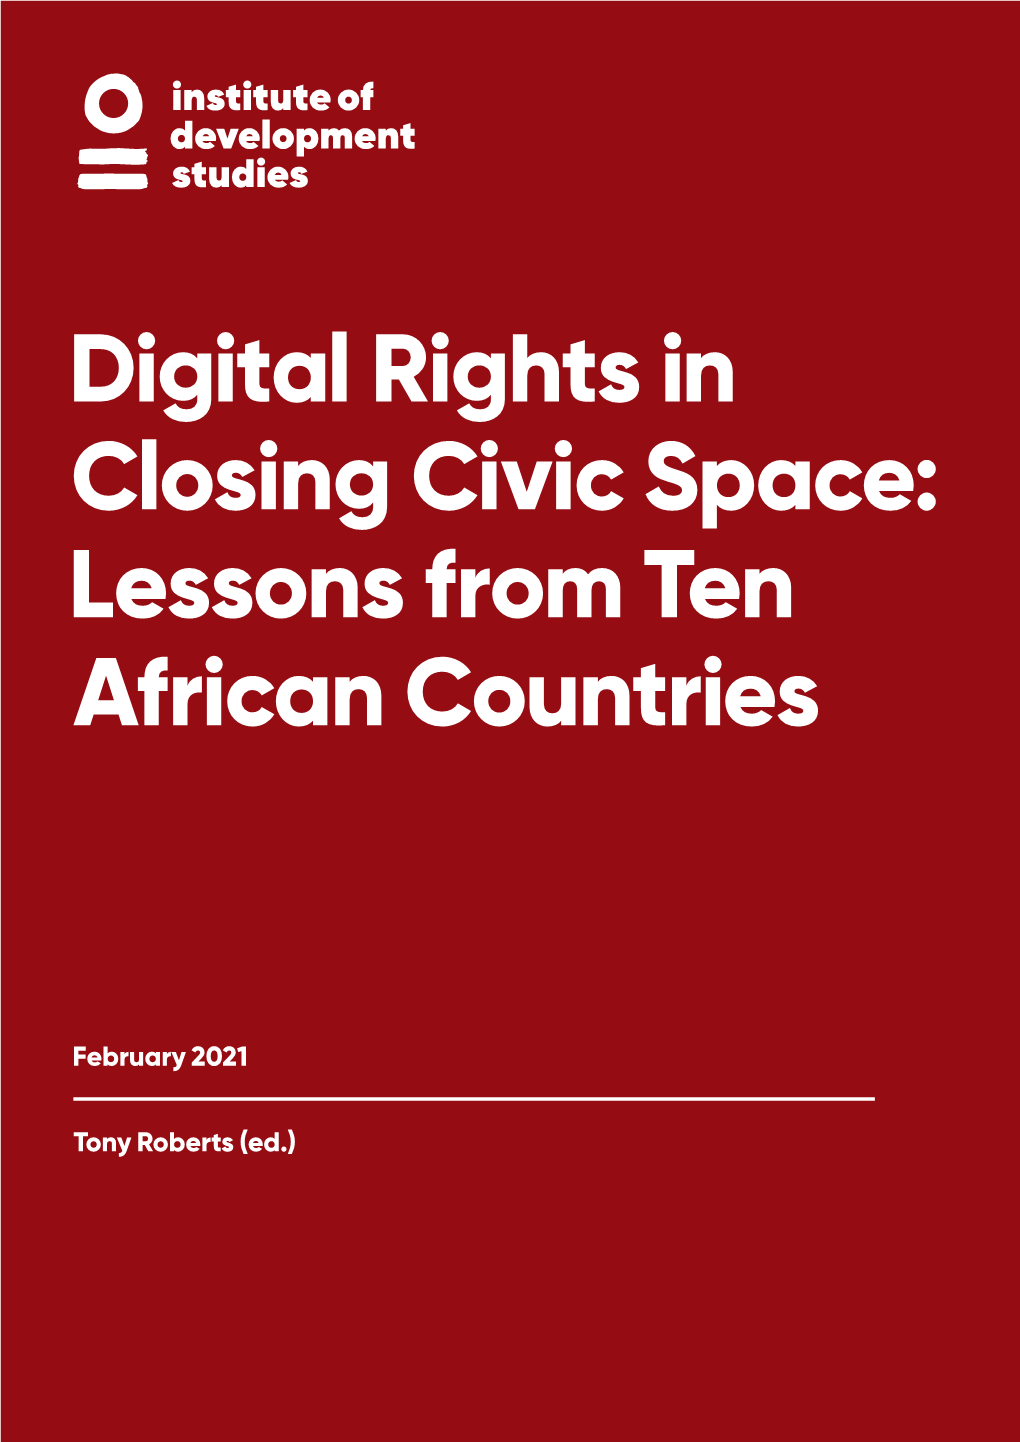 Digital Rights in Closing Civic Space: Lessons from Ten African Countries